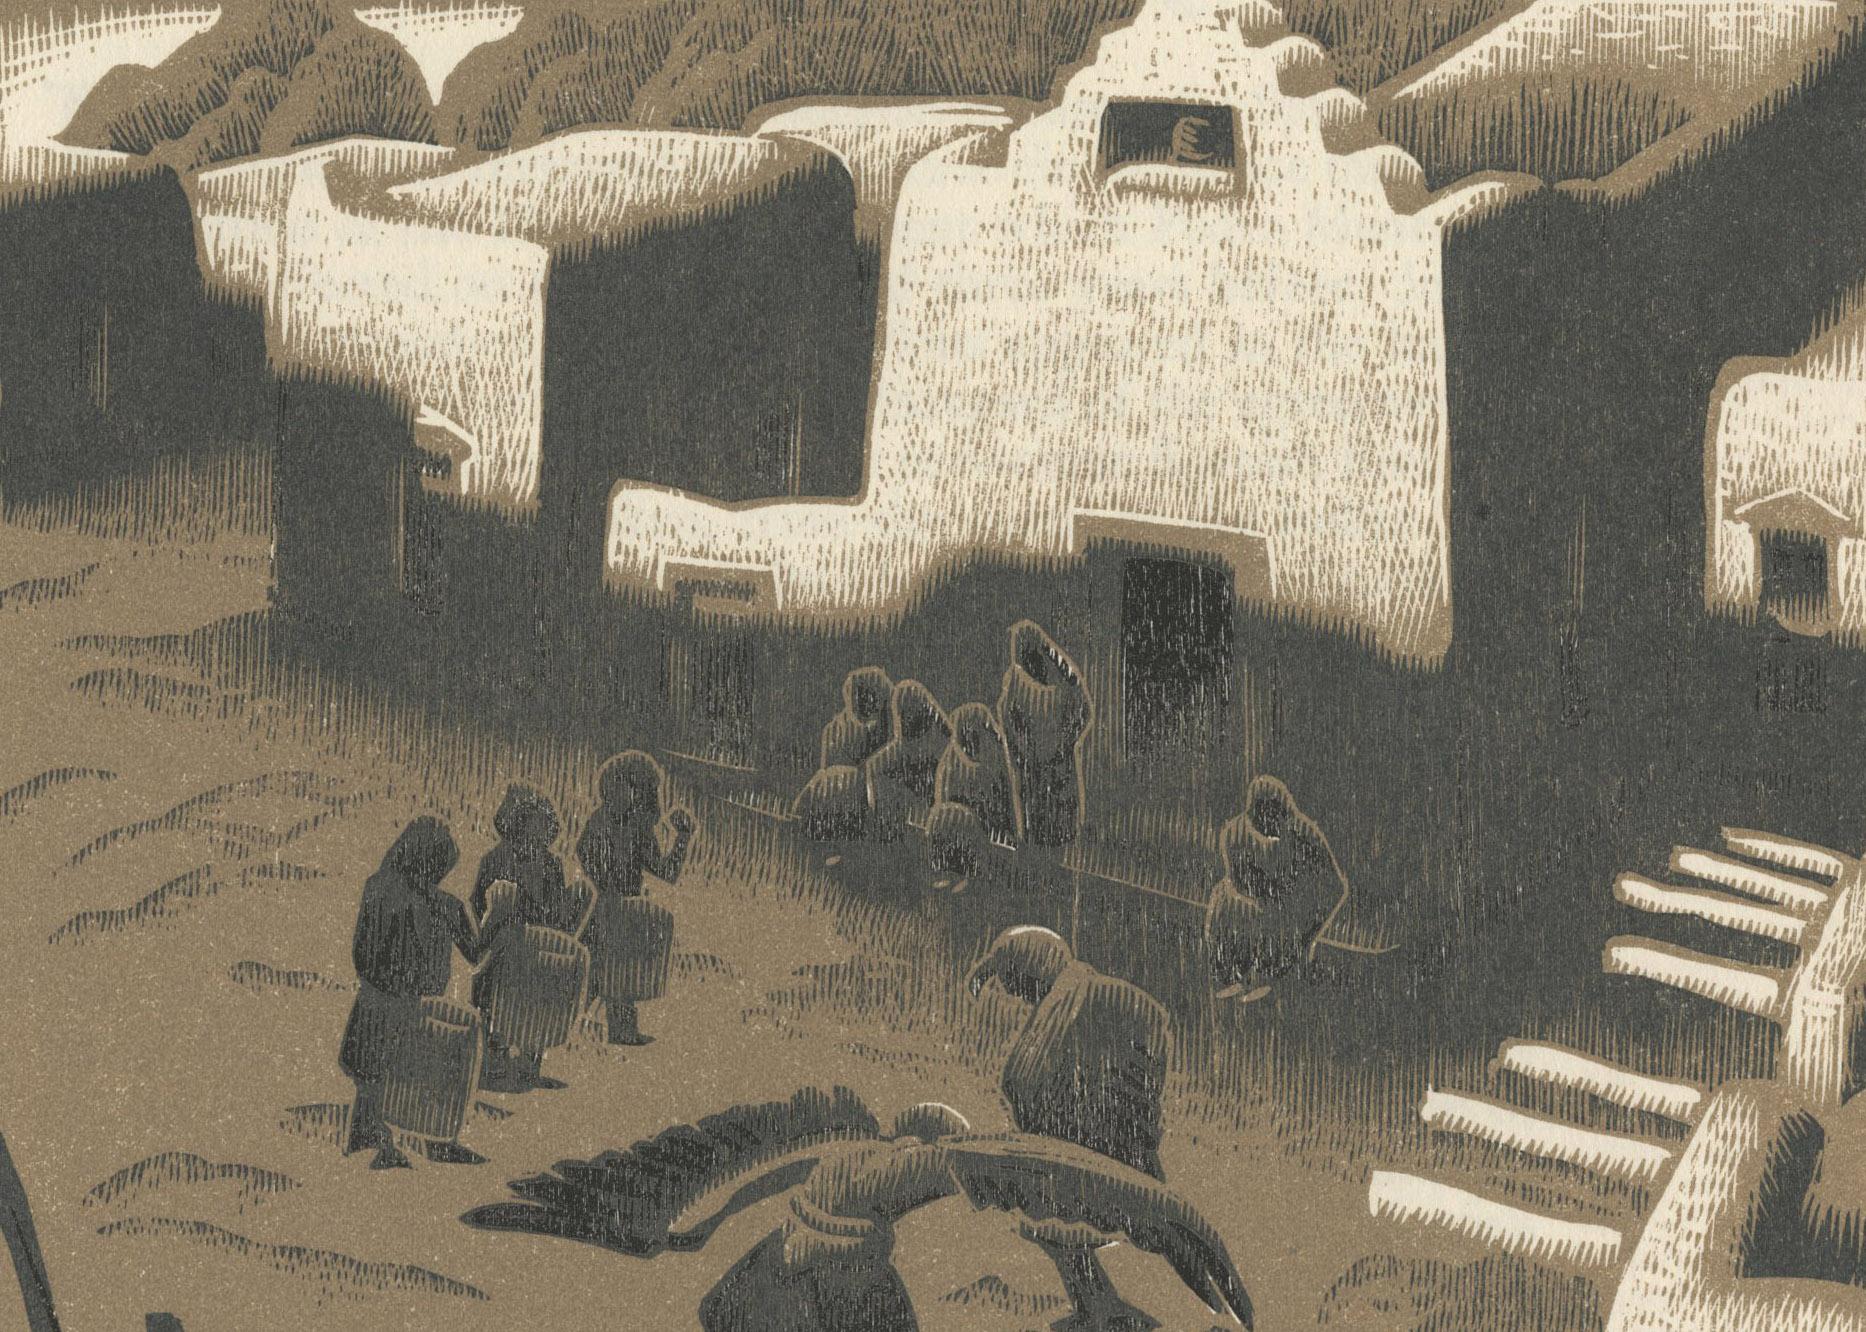 An Eagle Ceremony at Tesuque Pueblo
Woodcut printed in two colors, 1932
Unsigned as usual; initialed in the plate lower left (see photo)
As published by Elmer Adler in 